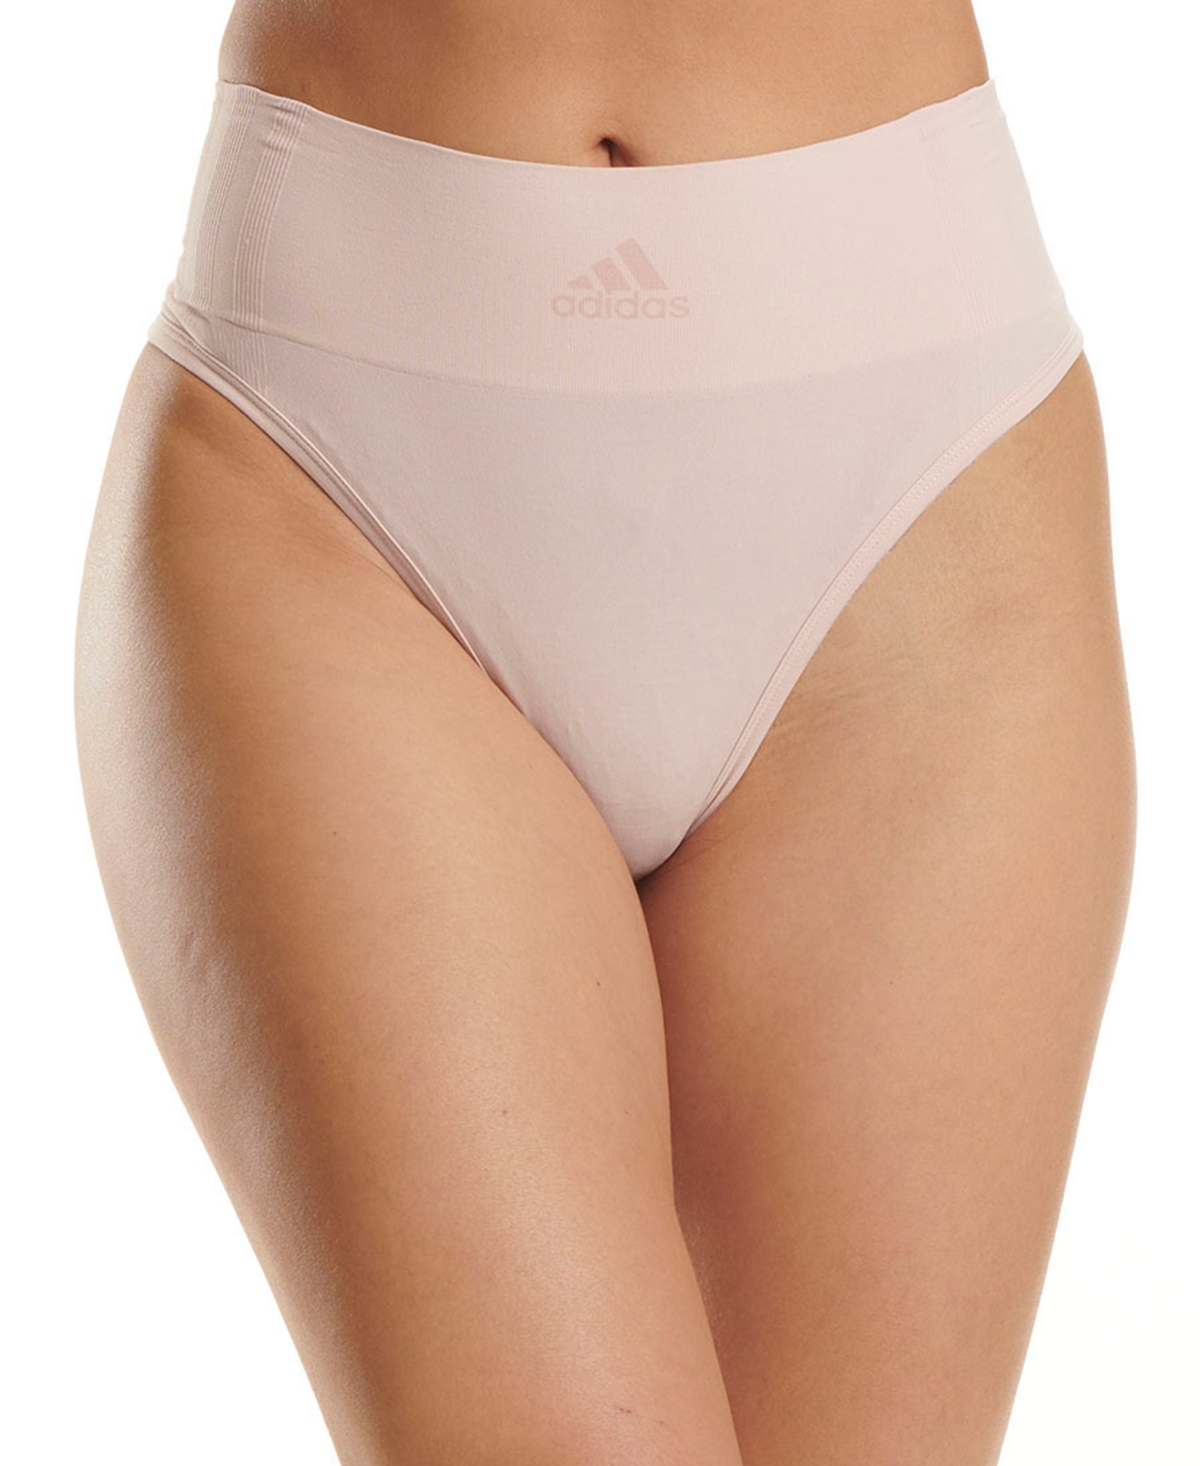 adidas Intimates Women's 720 Degree Stretch Thong Underwear 4A1H01 -  Toasted Almond